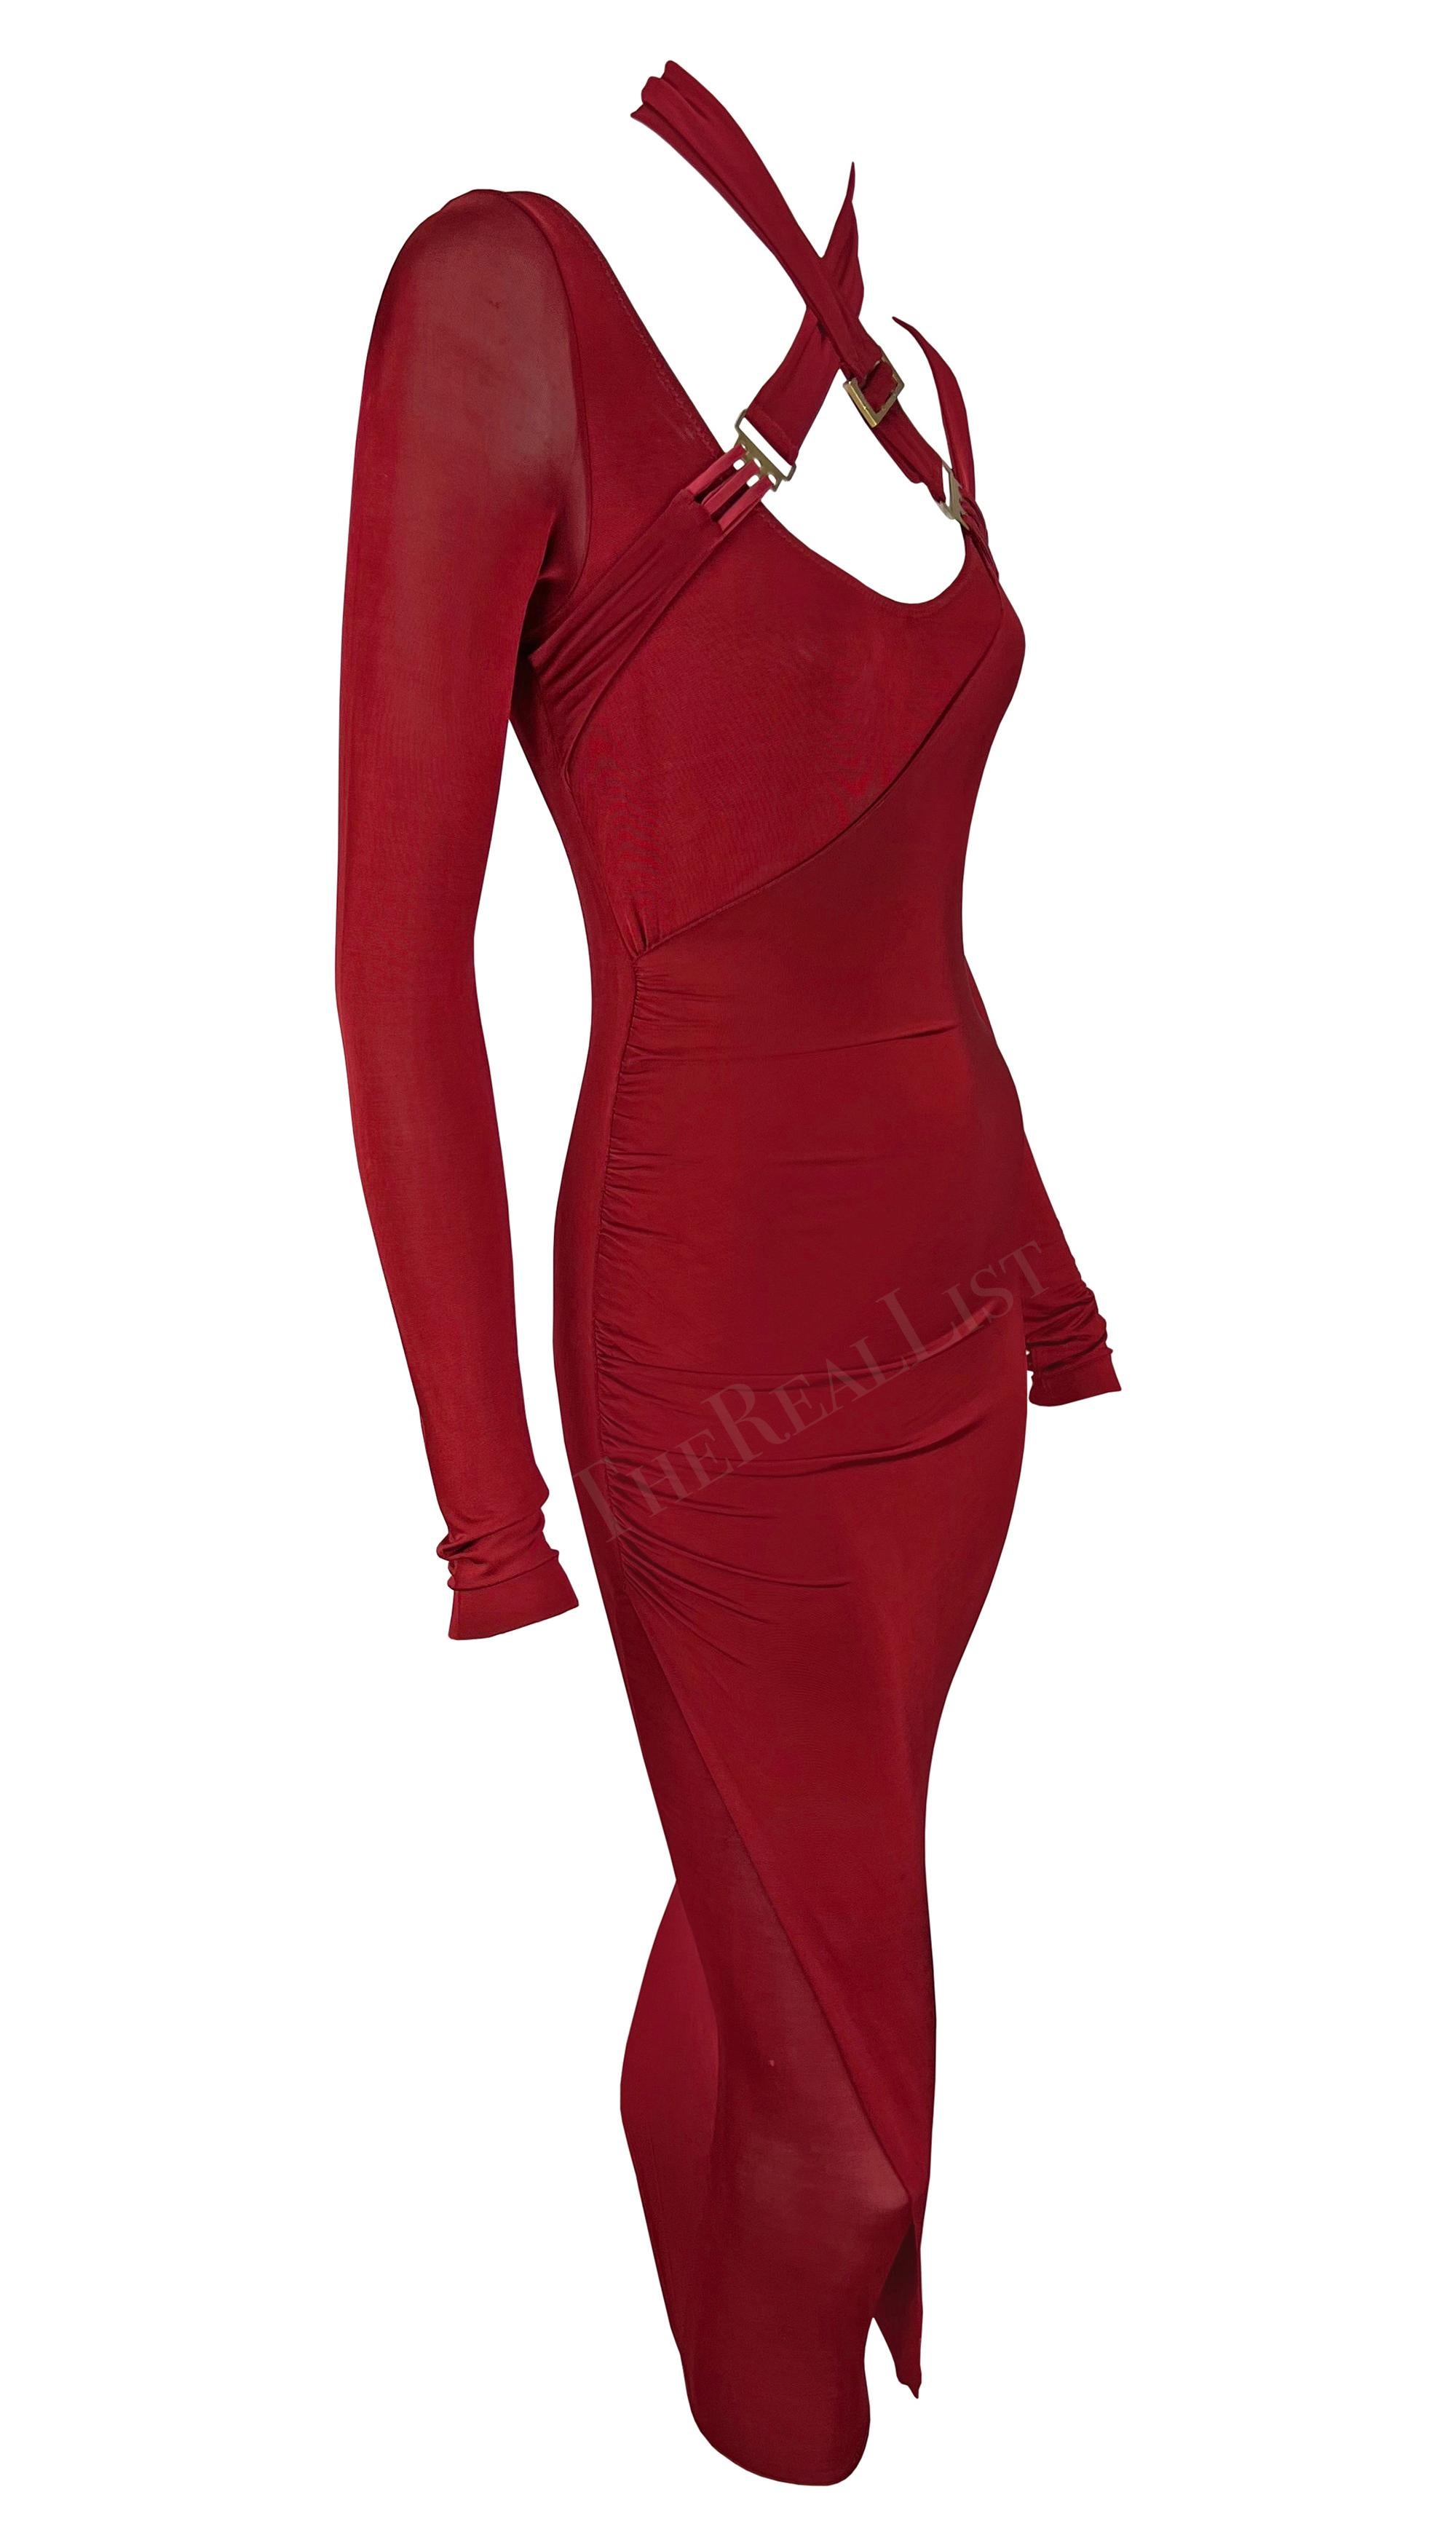 F/W 2003 Gucci by Tom Ford Red Bondage Strap Convertible Stretch Bodycon Dress For Sale 2